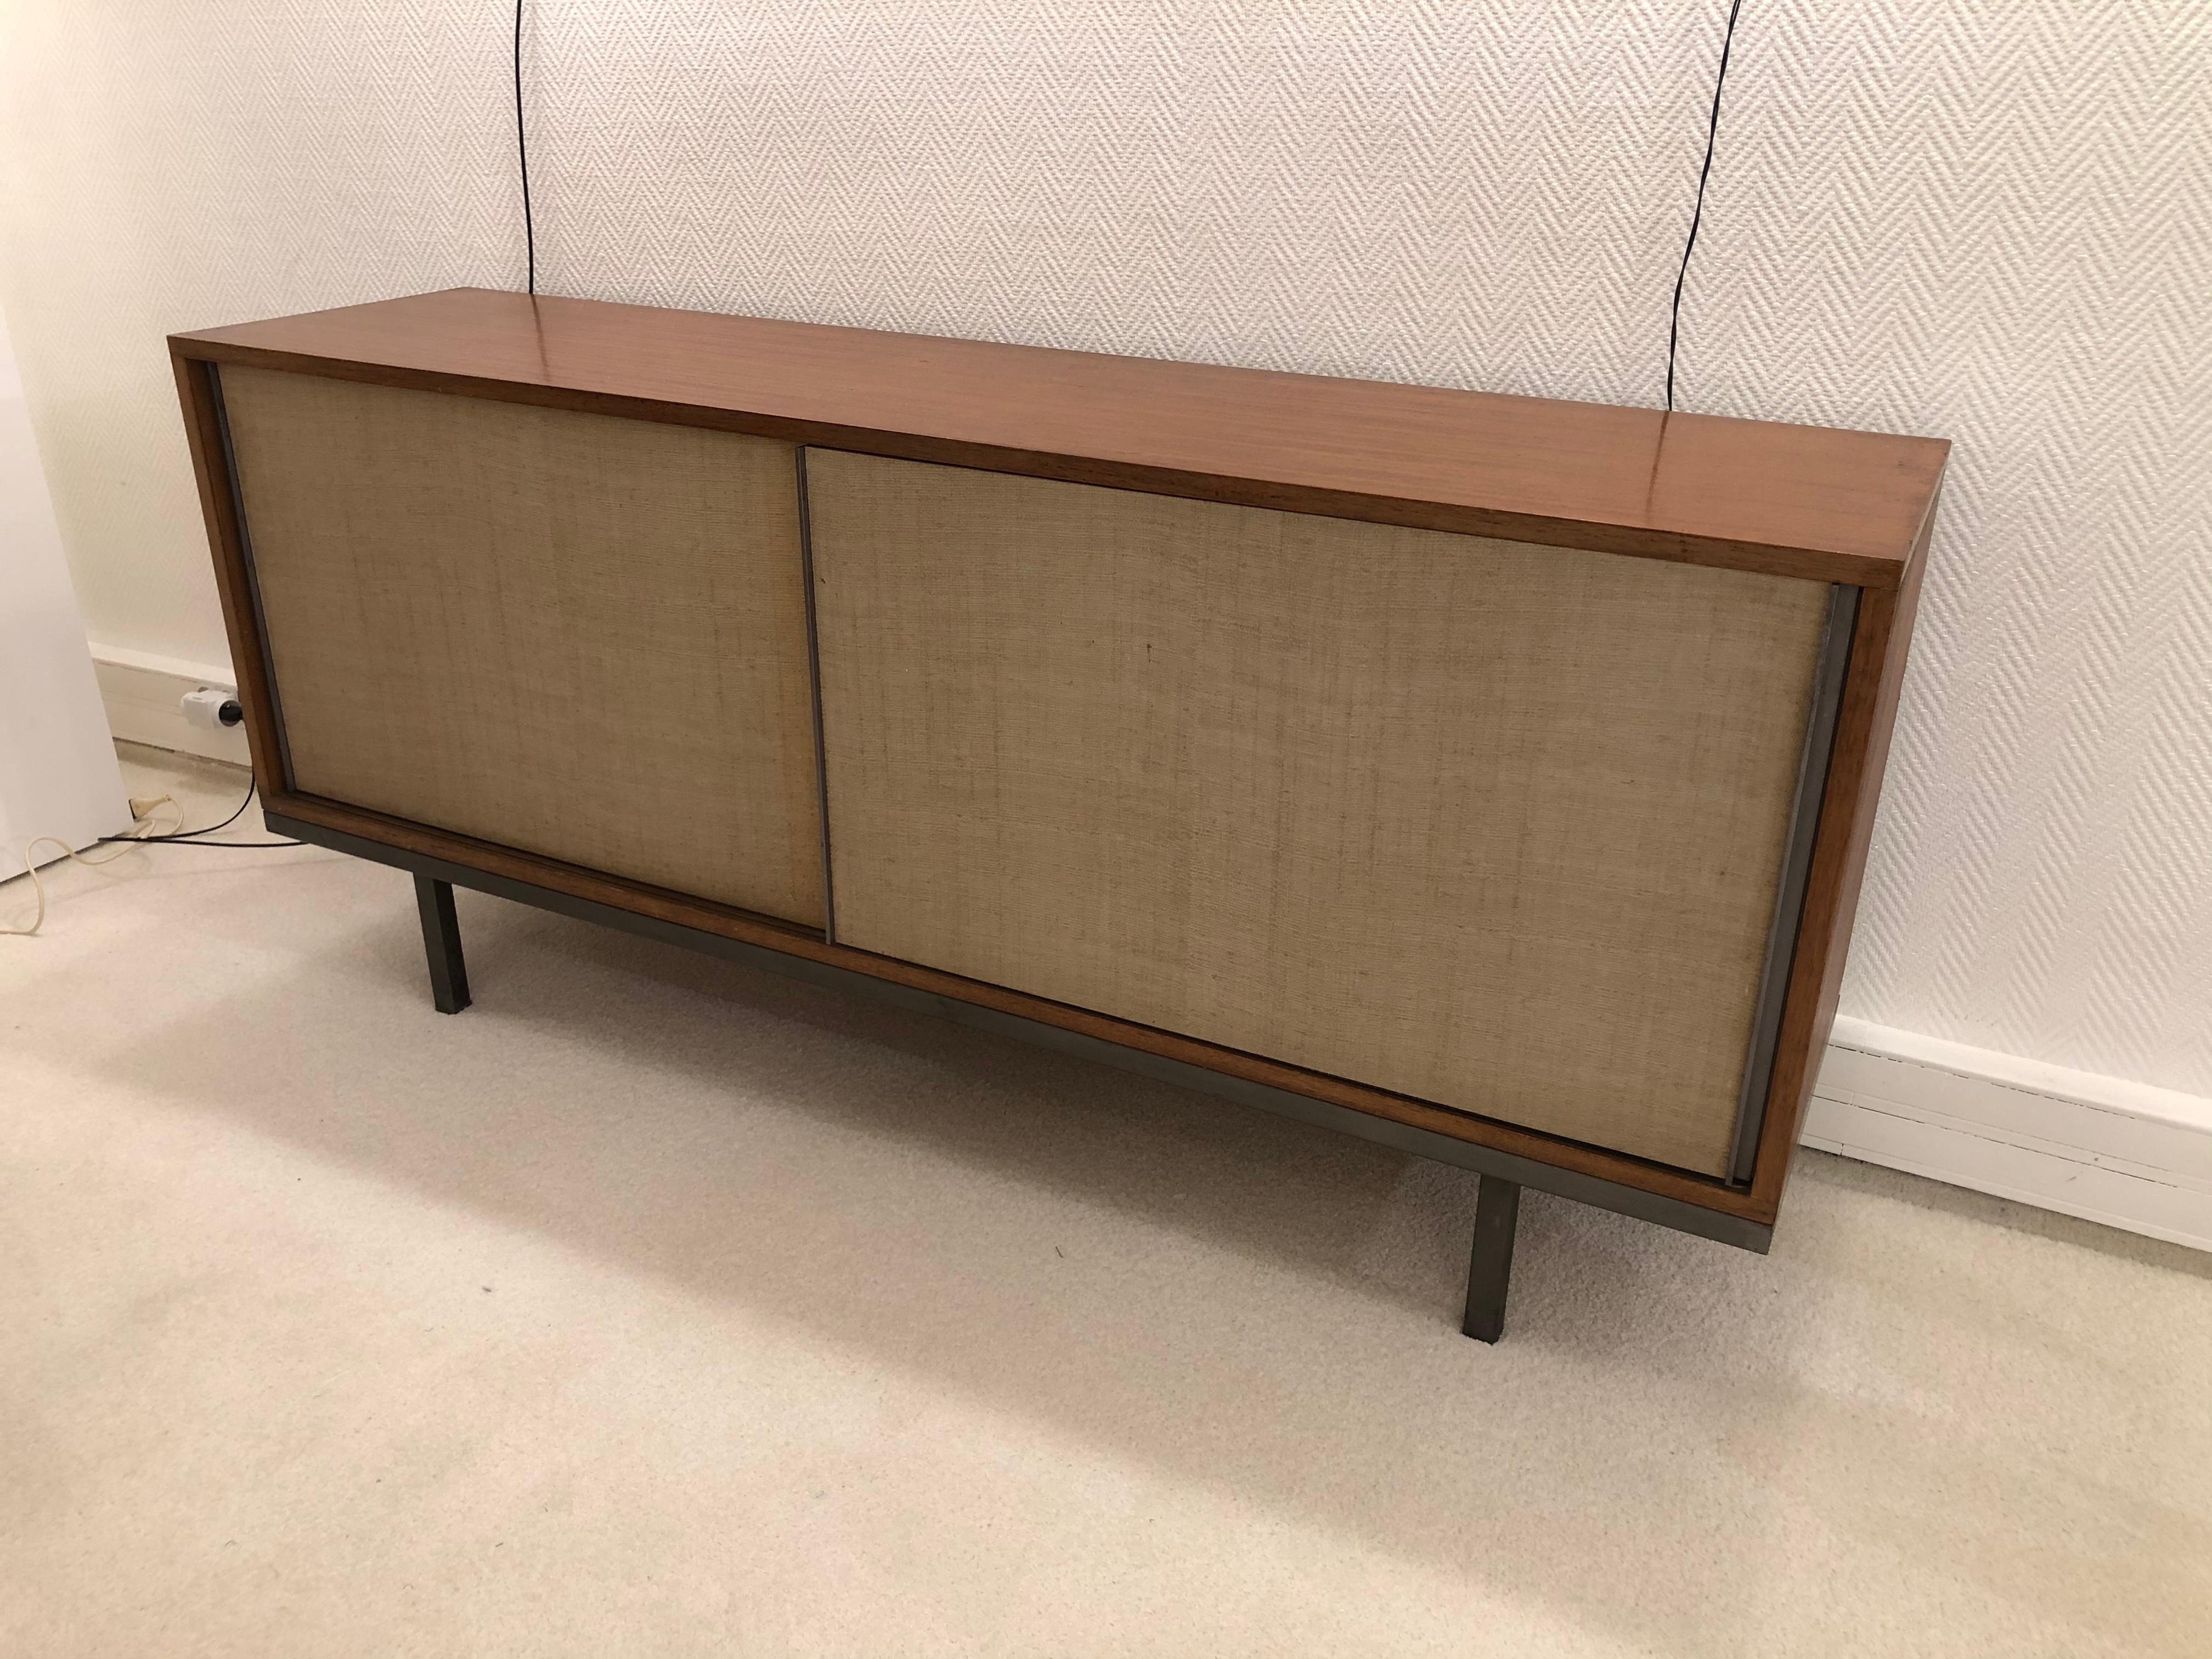 Sideboard by Georges Frydman
From 1960
in wood and raffia.